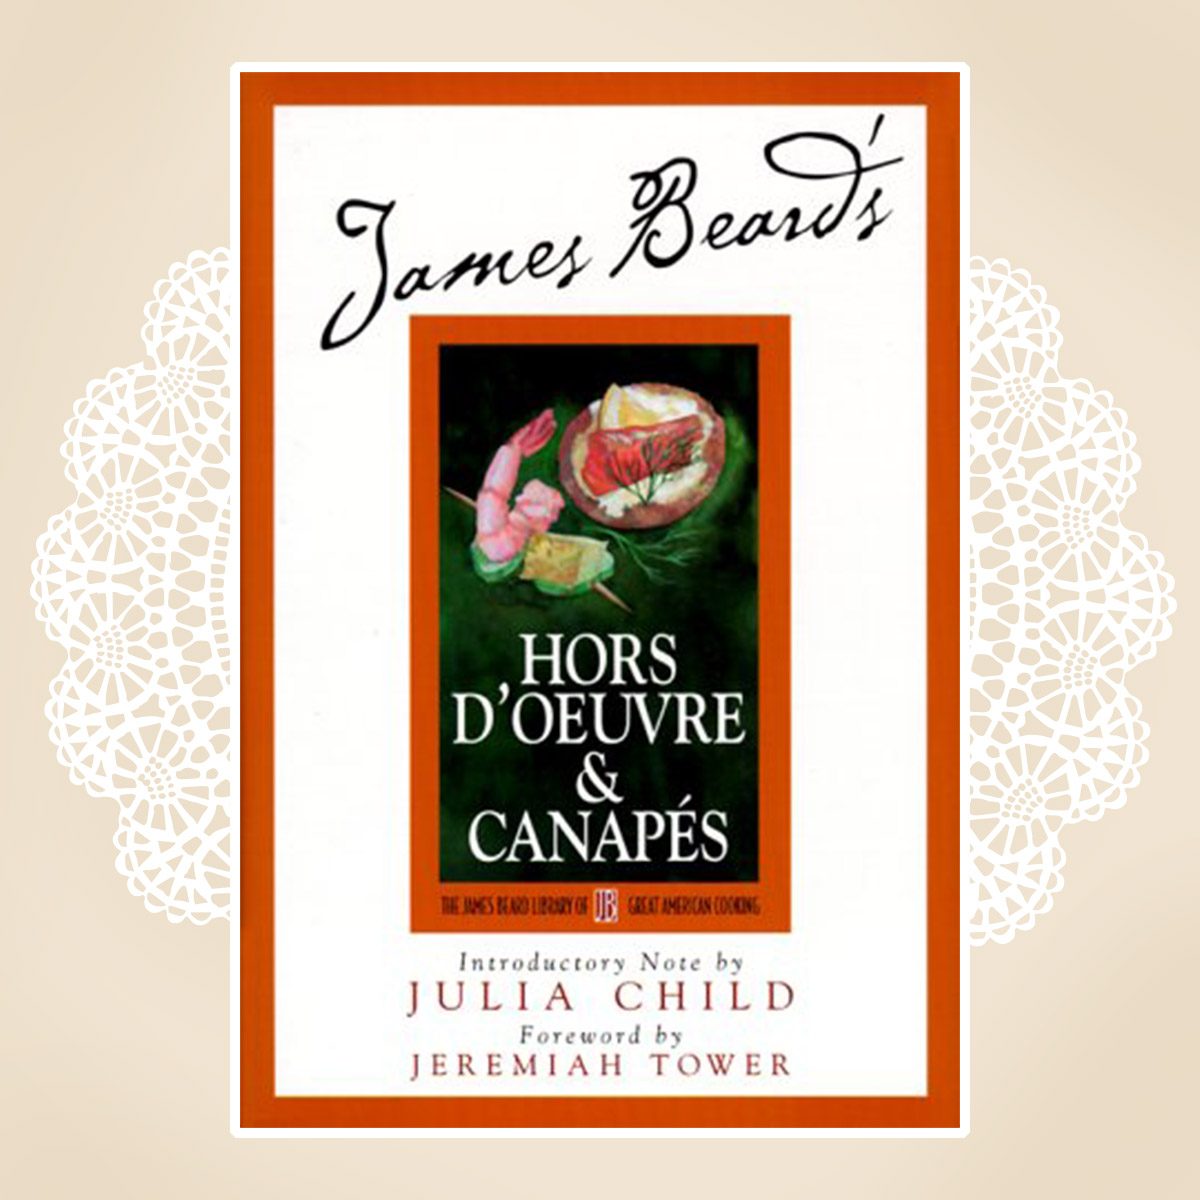 James Beard's Hors D'oeuvre & Canapes